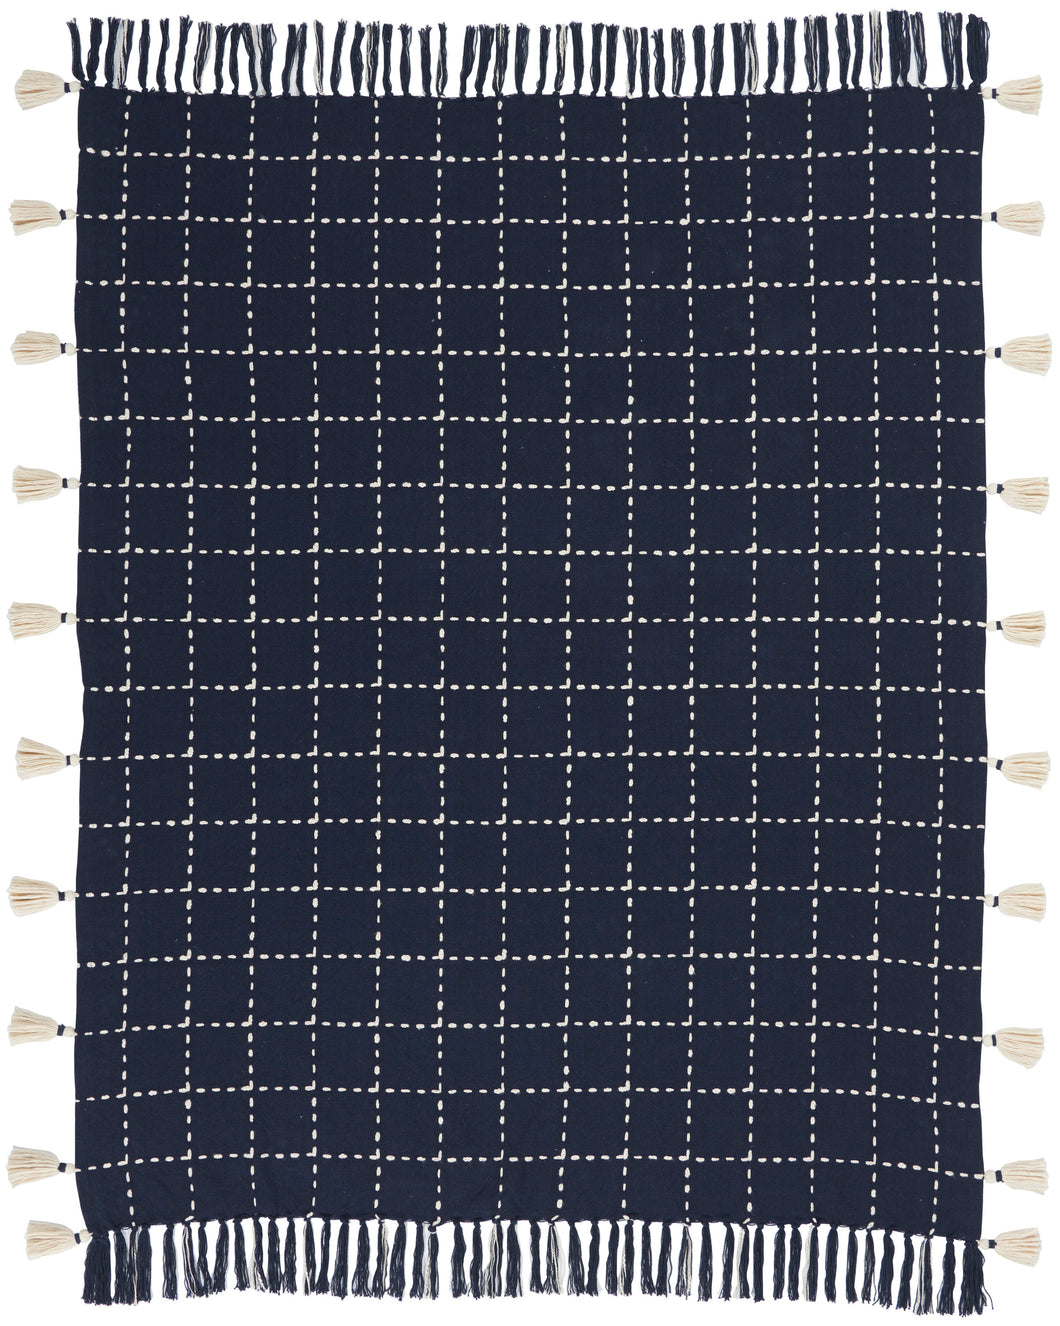 Mina Victory Life Styles Woven Check with Tassel Navy Throw Blanket SH033 50